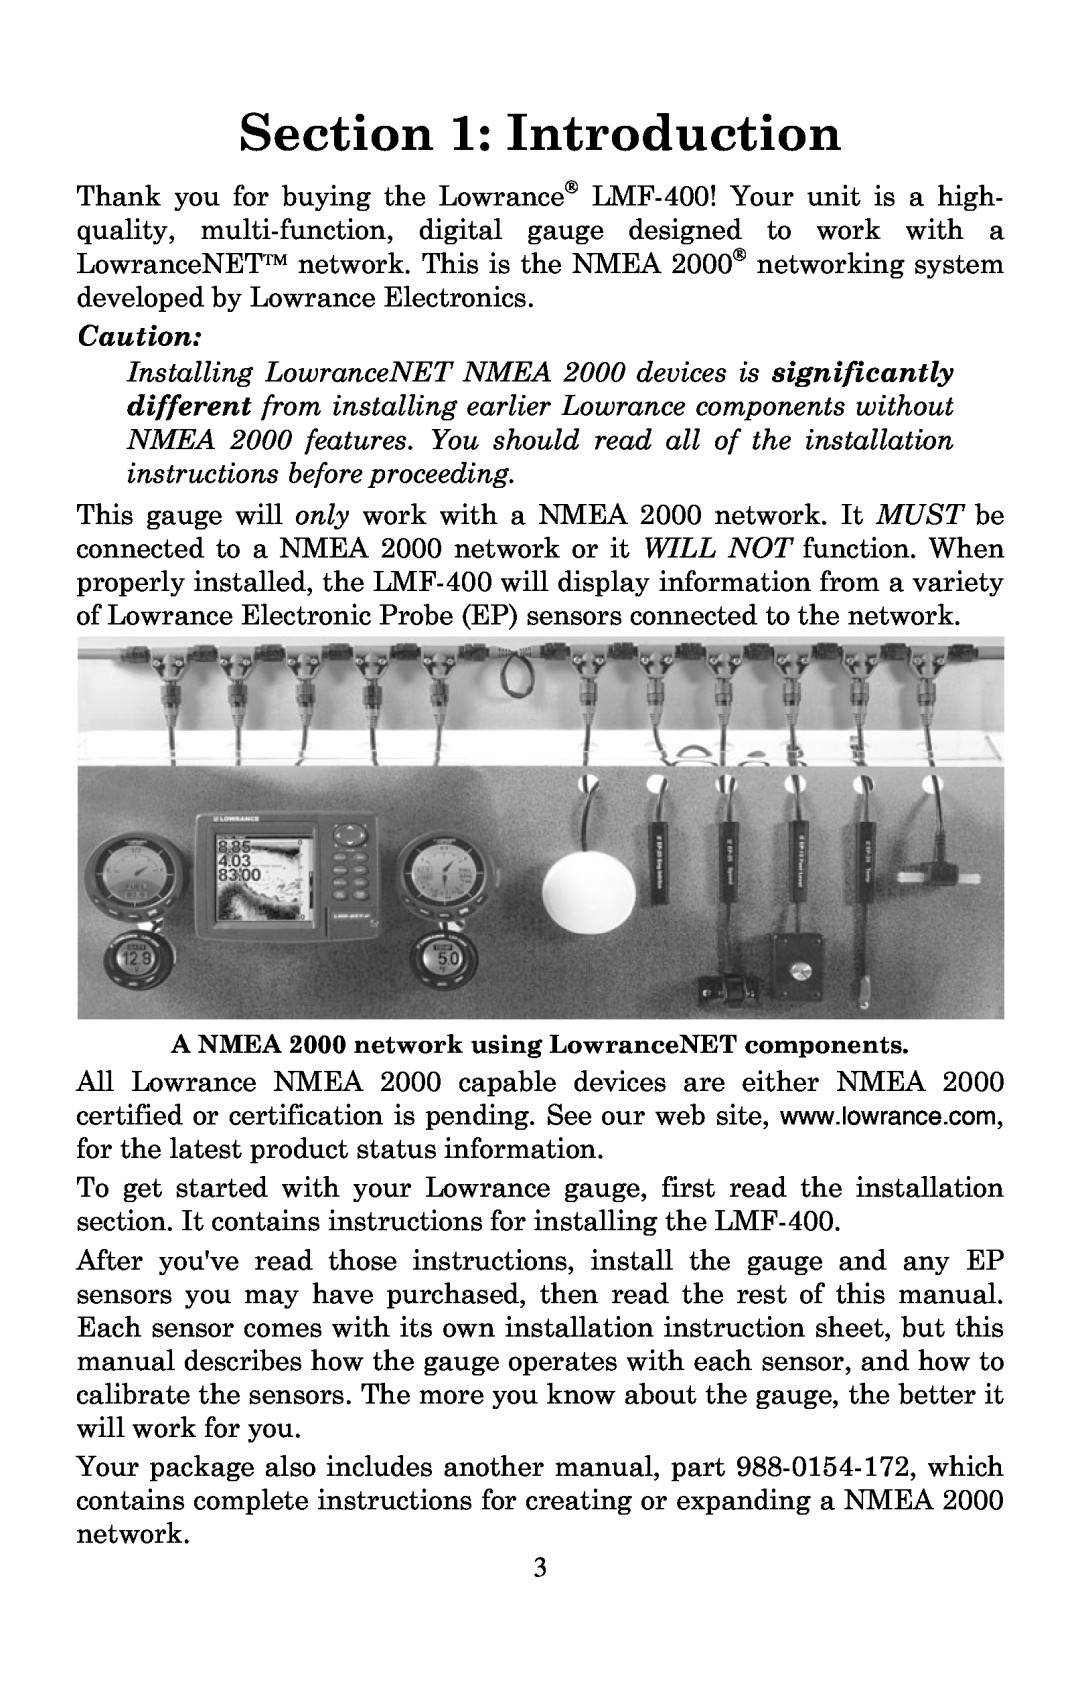 Lowrance electronic LMF-400 manual Introduction, A NMEA 2000 network using LowranceNET components 